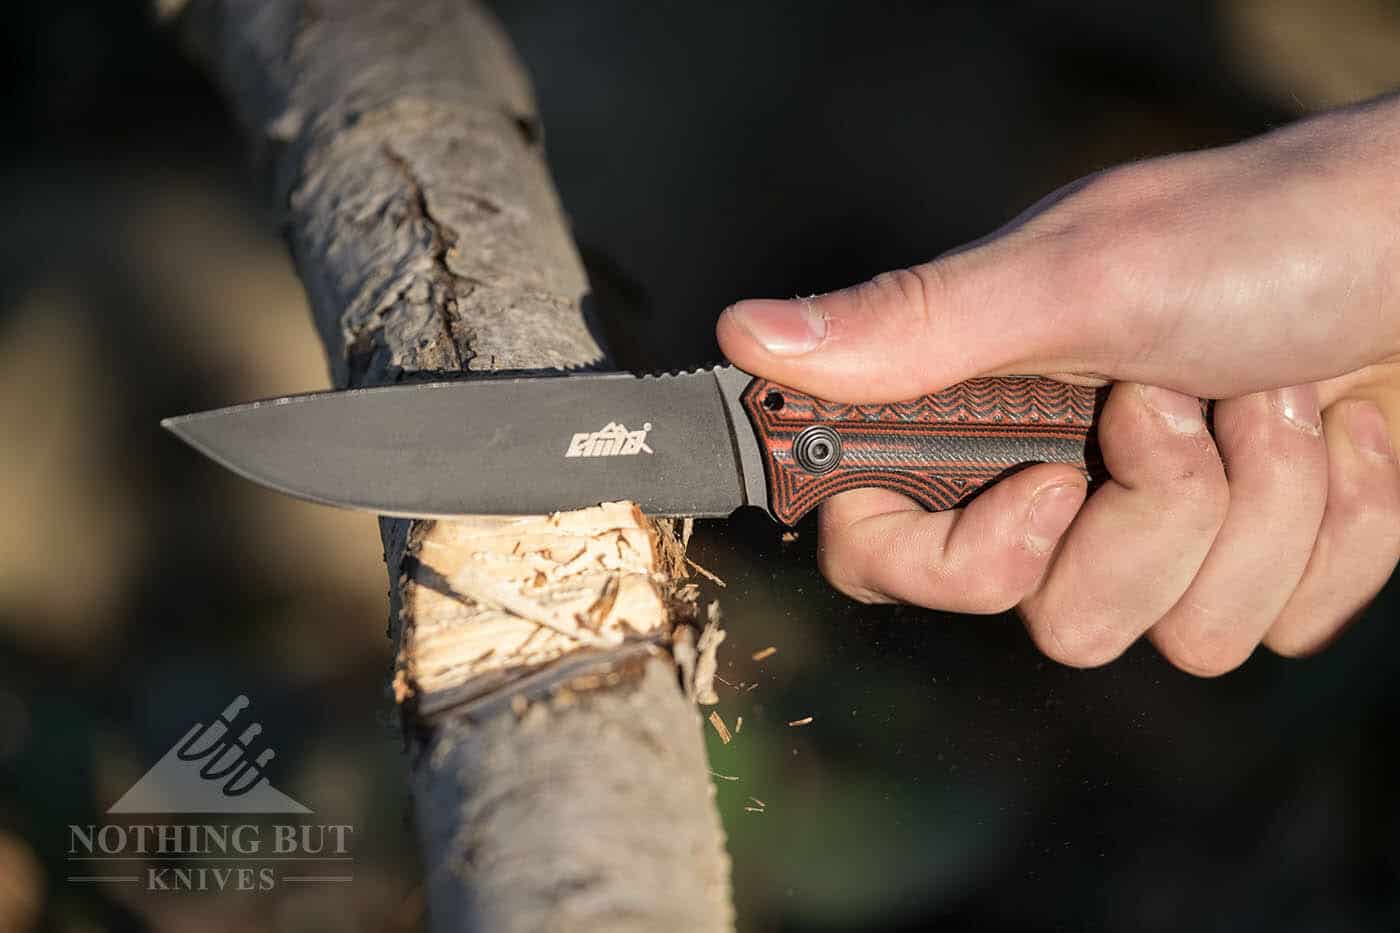 The Cima G20 Survival Knife chopping a tree limb in the forest.